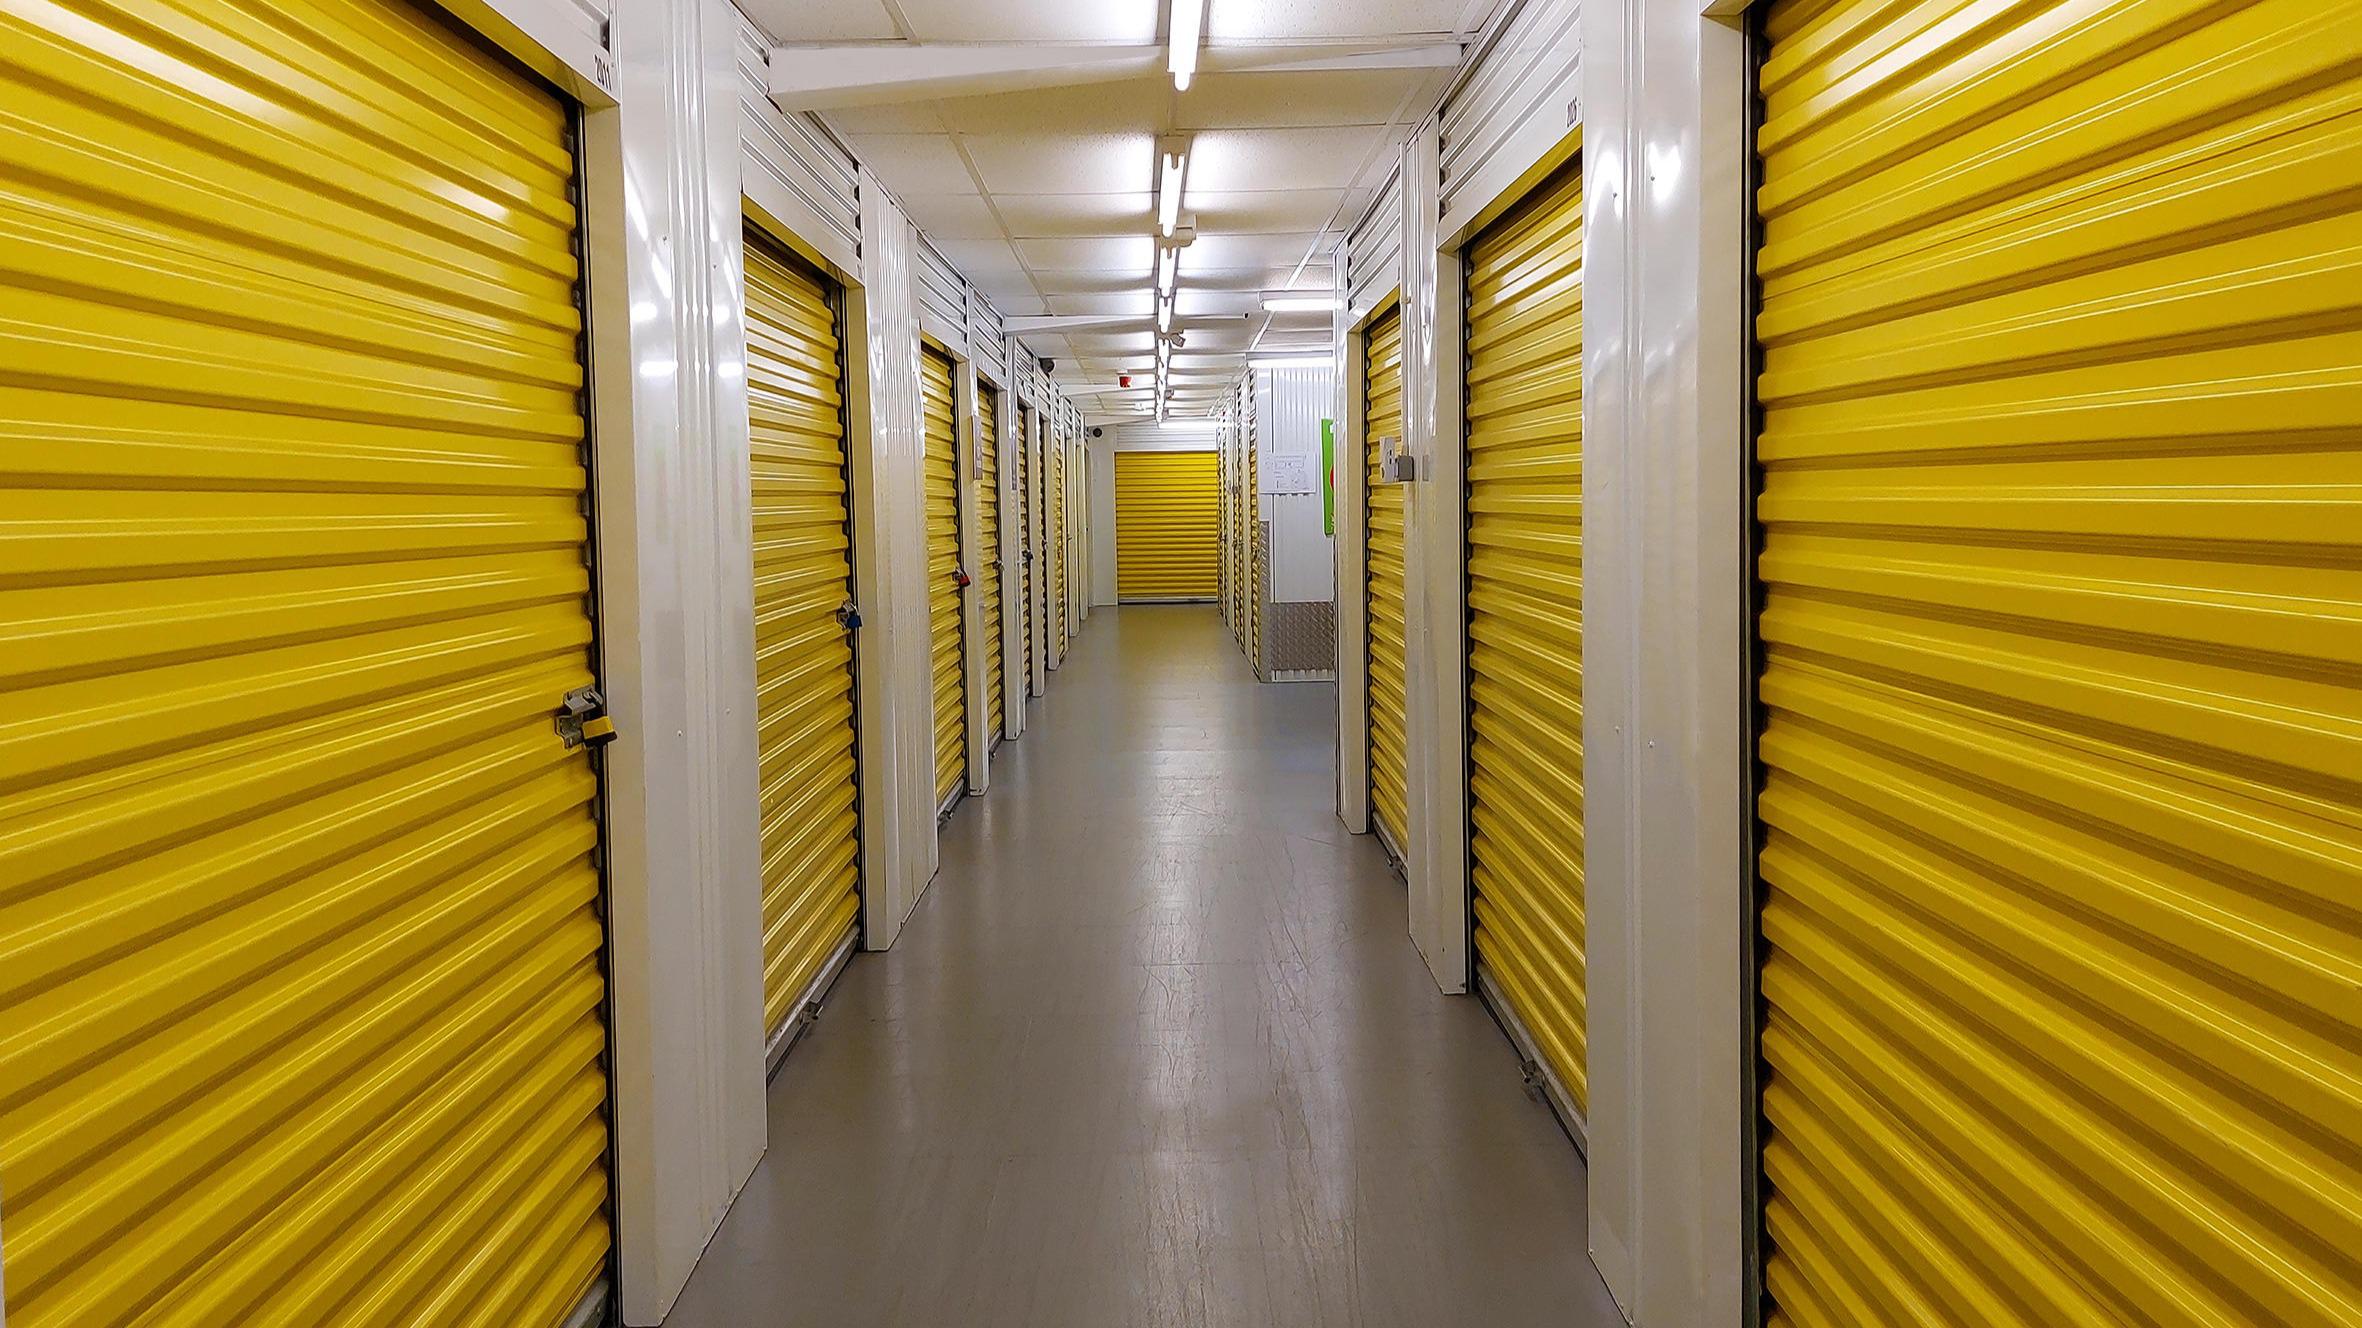 Images Ready Steady Store Self Storage Tunstall